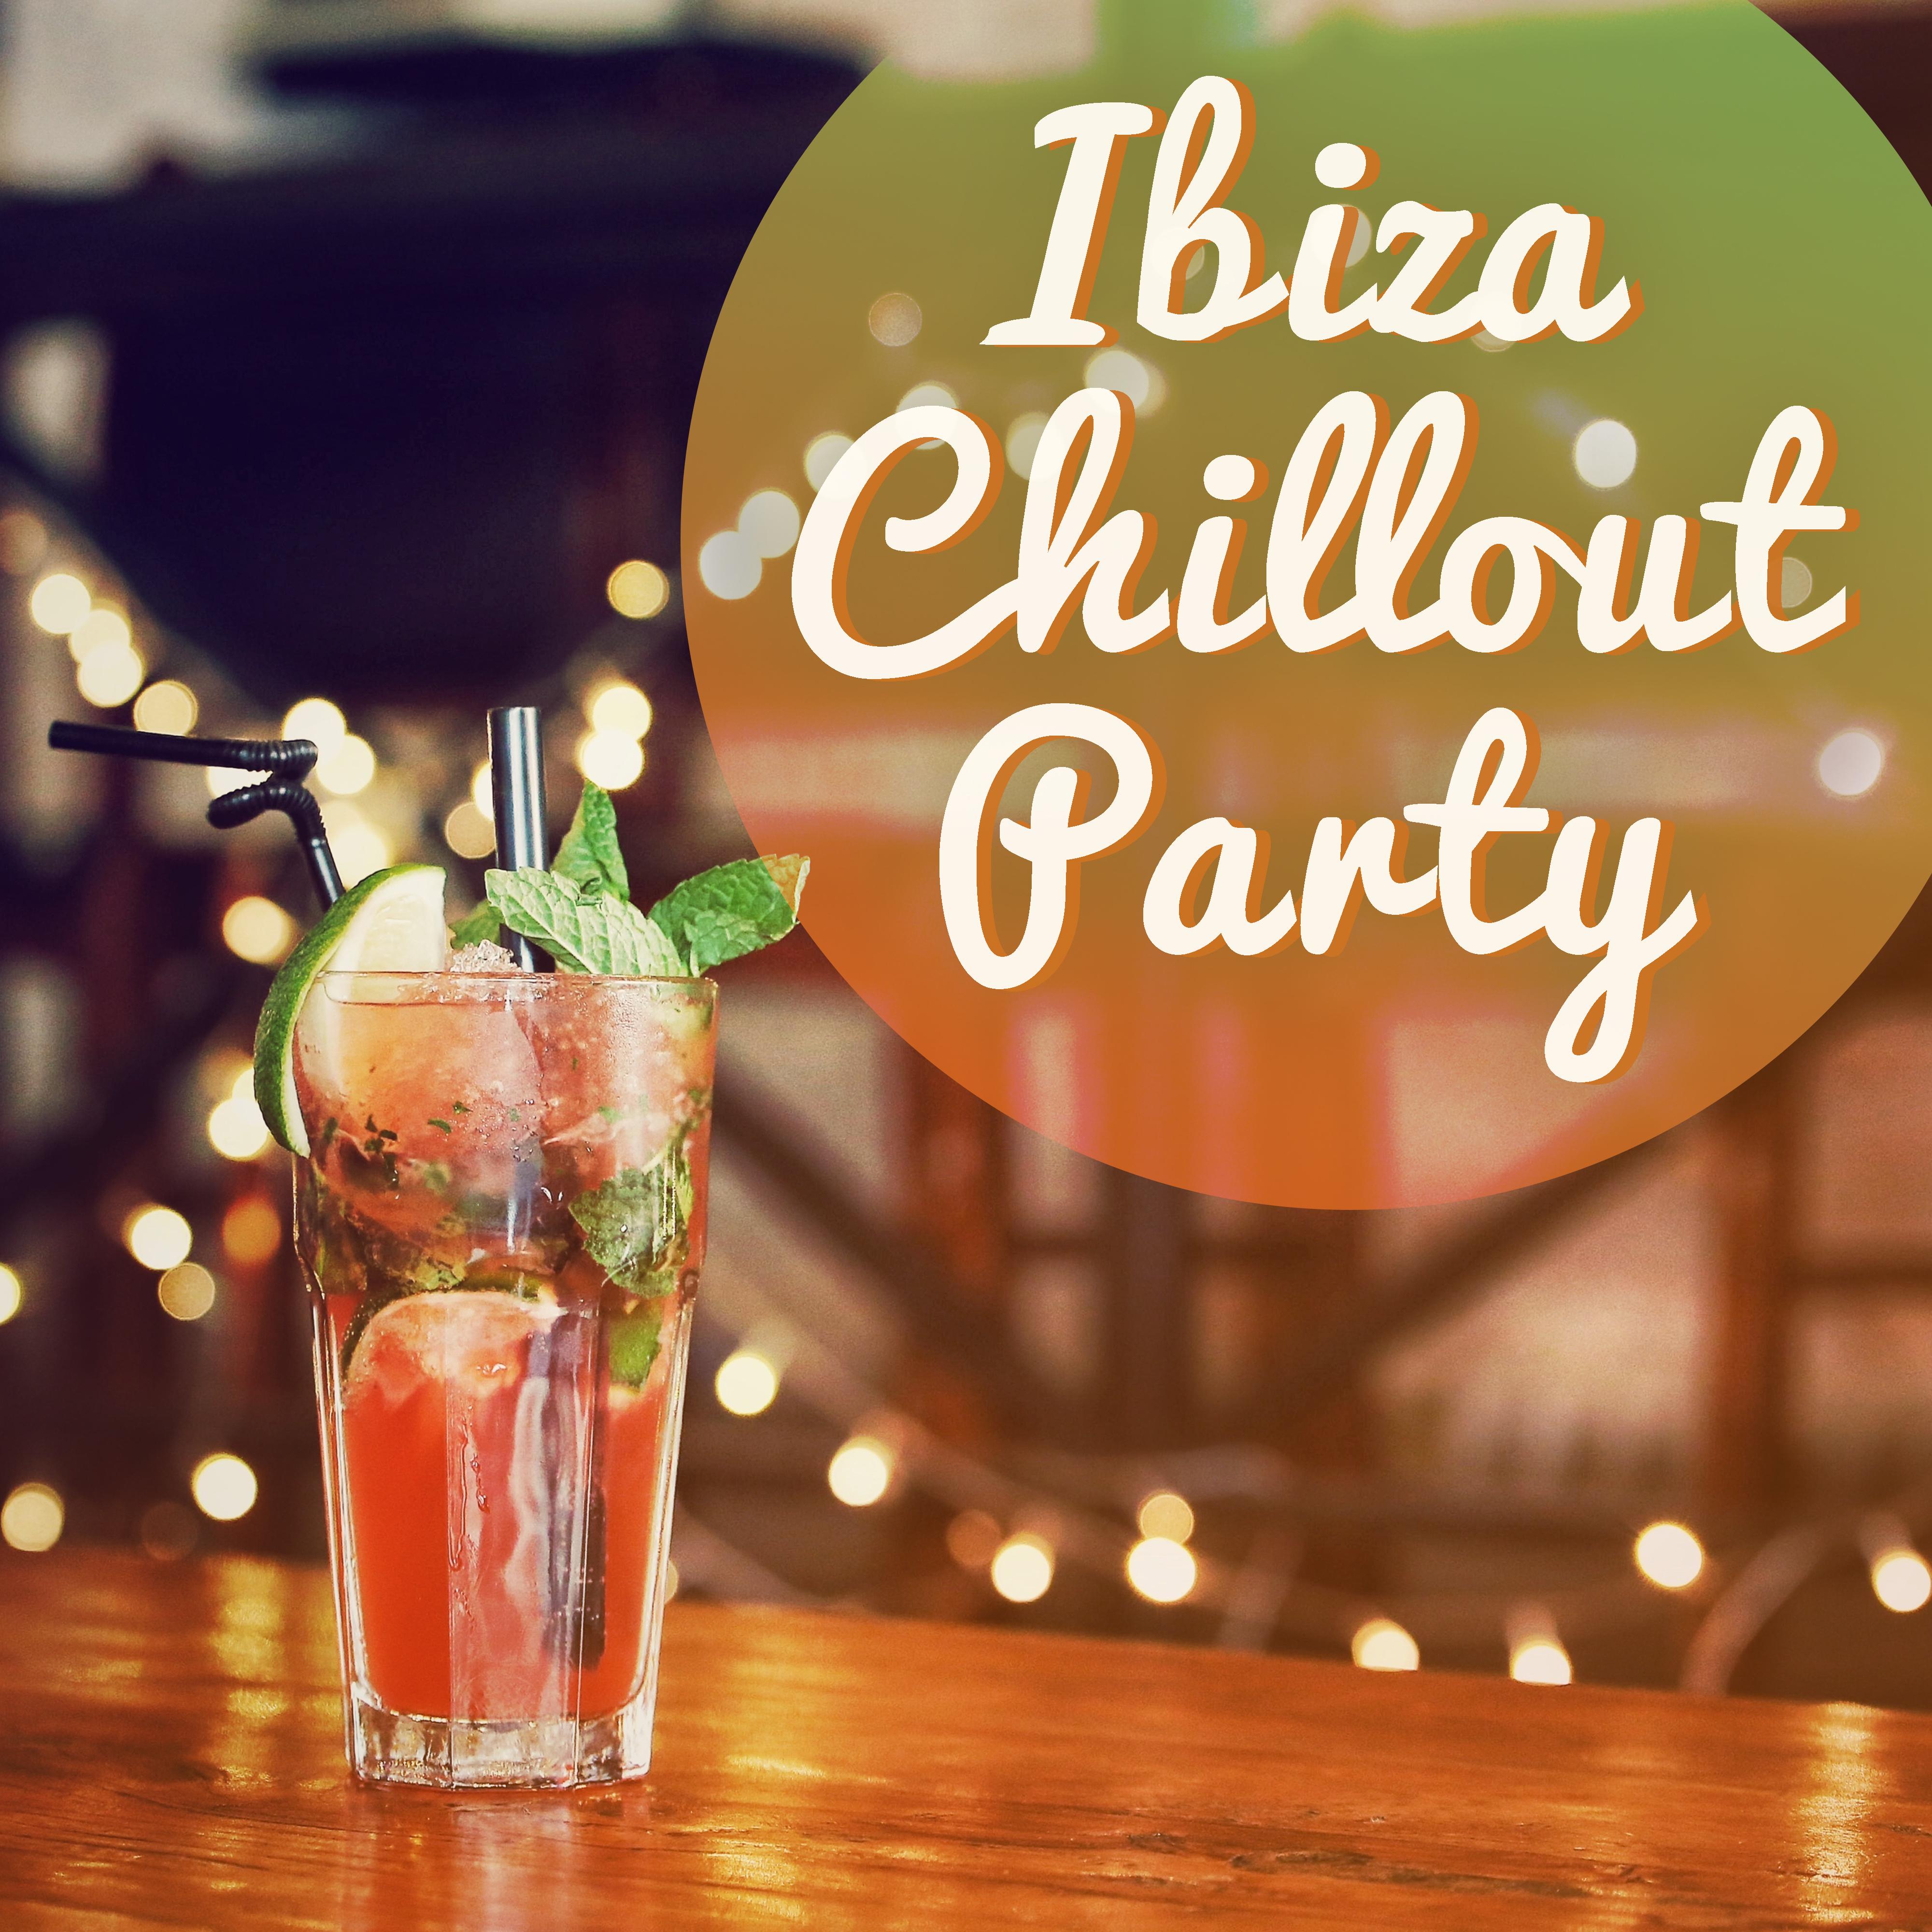 Ibiza Chillout Party – Hot Dance, *** Music, Hot Party, Bar Chill Out, Ibiza 2017